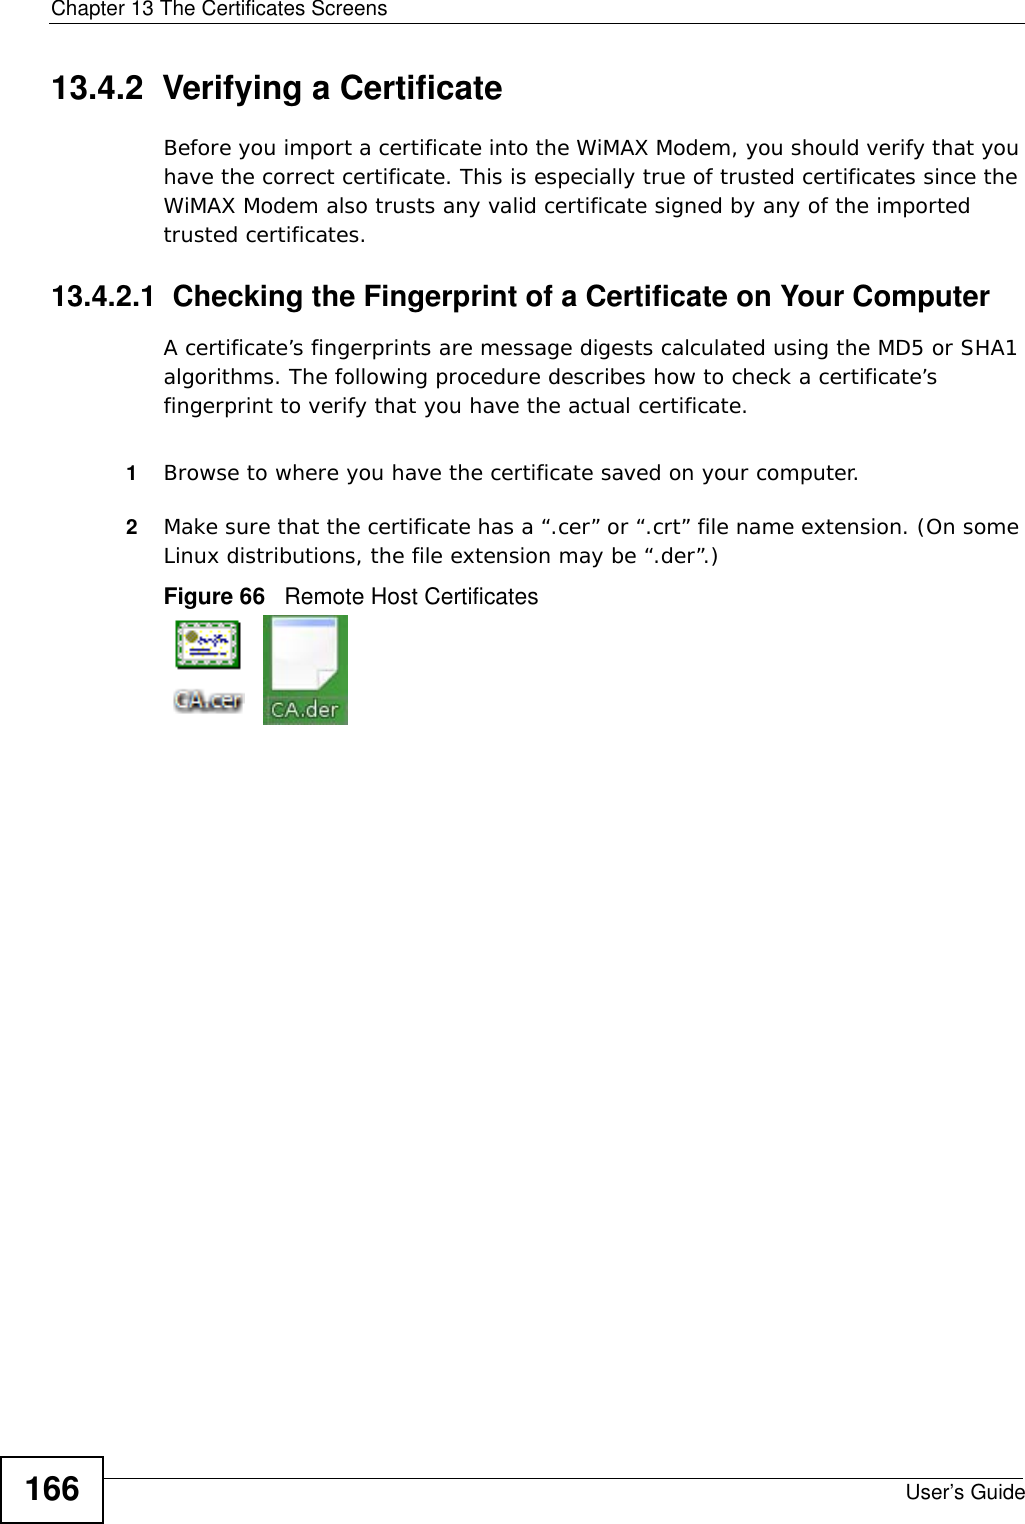 Chapter 13 The Certificates ScreensUser’s Guide16613.4.2  Verifying a CertificateBefore you import a certificate into the WiMAX Modem, you should verify that you have the correct certificate. This is especially true of trusted certificates since the WiMAX Modem also trusts any valid certificate signed by any of the imported trusted certificates.13.4.2.1  Checking the Fingerprint of a Certificate on Your ComputerA certificate’s fingerprints are message digests calculated using the MD5 or SHA1 algorithms. The following procedure describes how to check a certificate’s fingerprint to verify that you have the actual certificate. 1Browse to where you have the certificate saved on your computer. 2Make sure that the certificate has a “.cer” or “.crt” file name extension. (On some Linux distributions, the file extension may be “.der”.)Figure 66   Remote Host Certificates